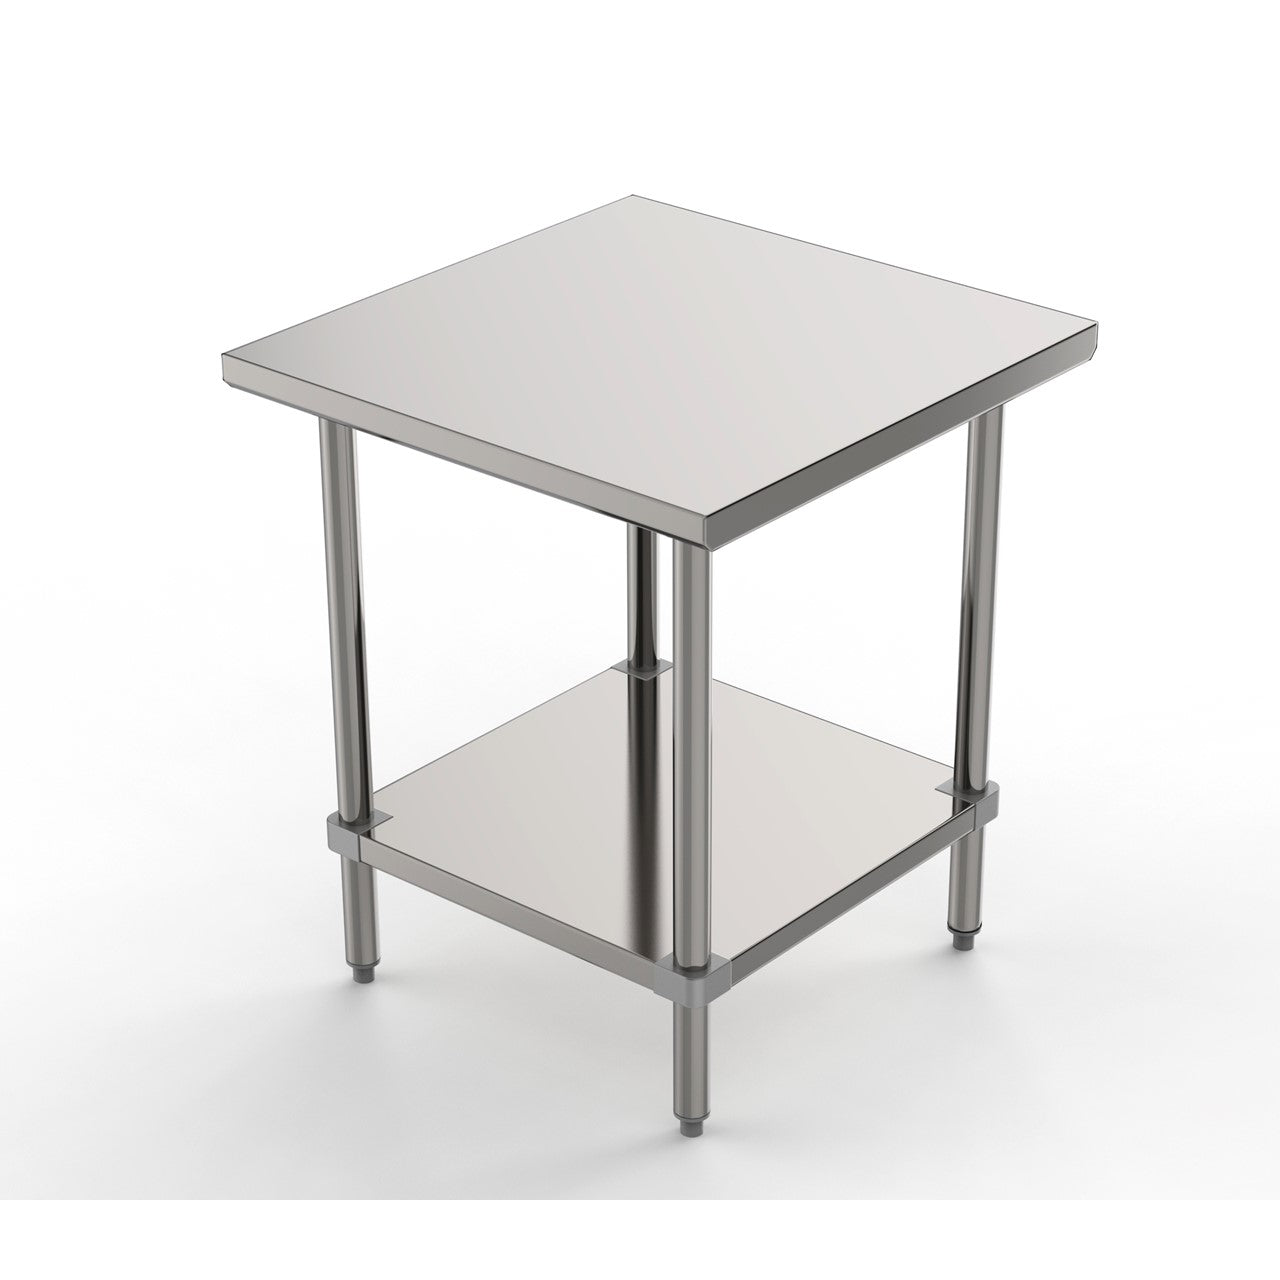 GSW Commercial Grade Flat Top Work Table with Stainless Steel Top, Galvanized Undershelf & Legs, Adjustable Bullet Feet, Perfect for Restaurant, Home, Office, Kitchen or Garage, NSF Approved (24"D x 24"L x 35"H)